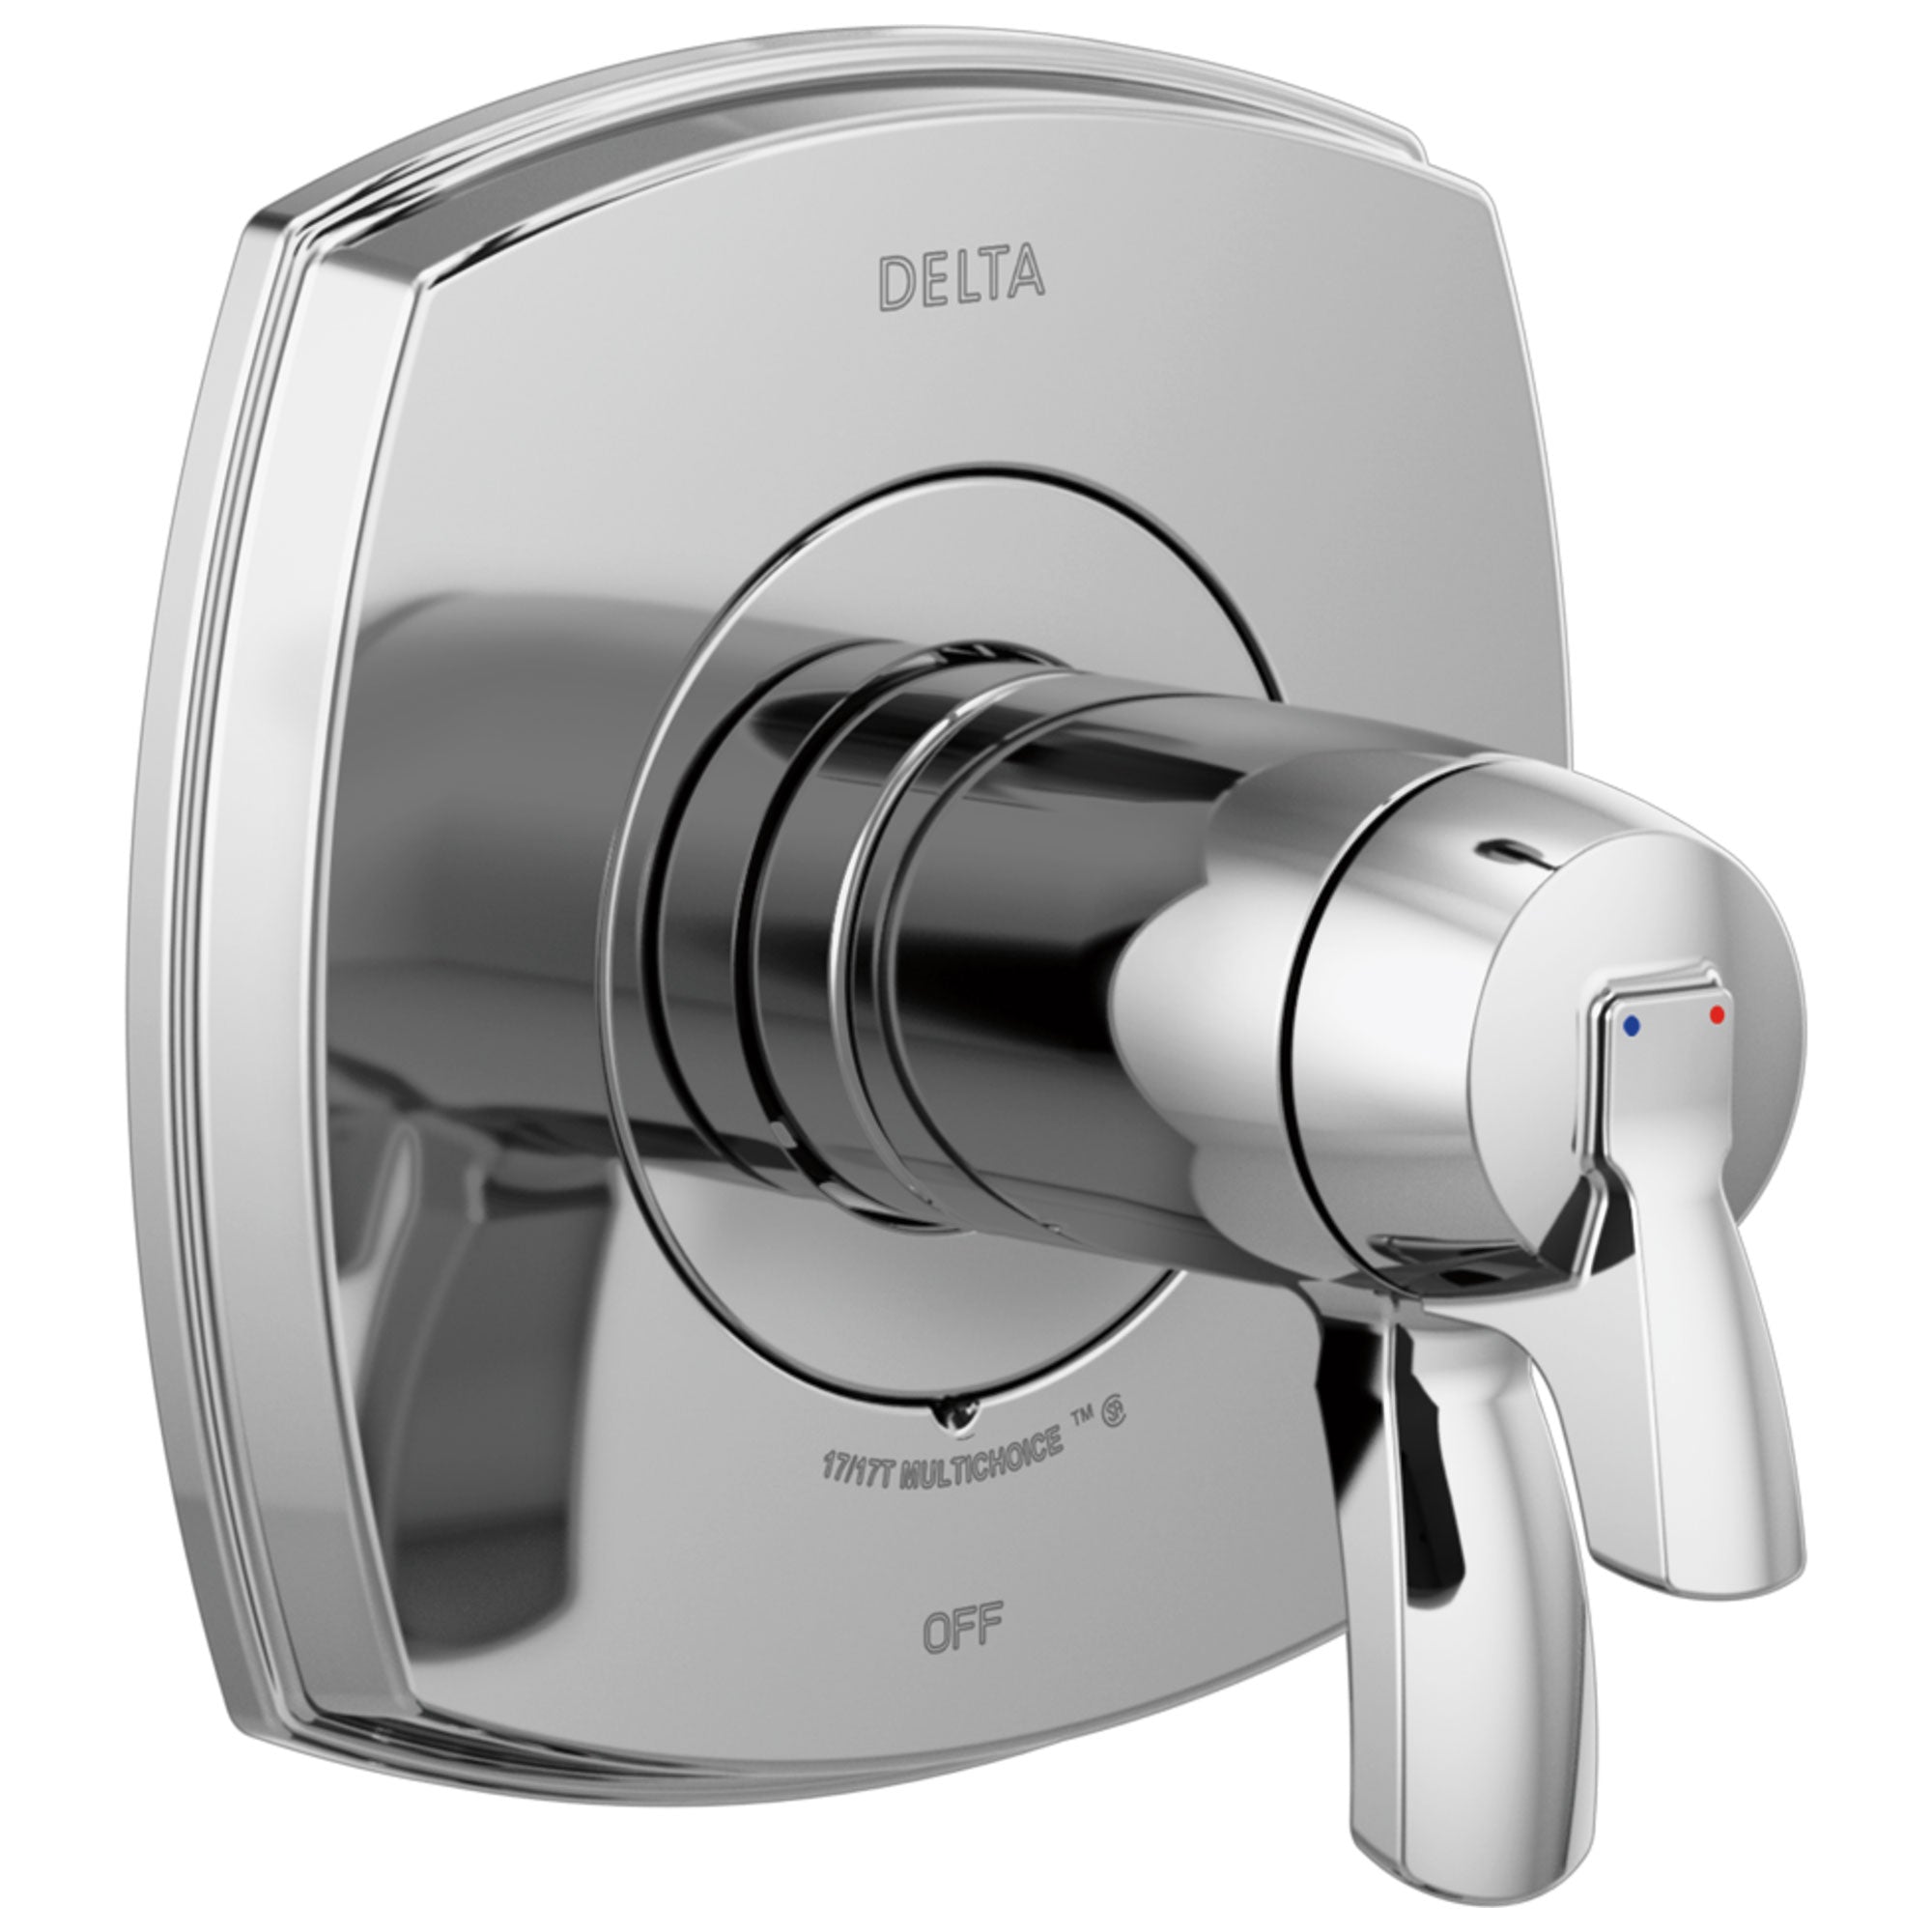 Delta Stryke Chrome Finish Thermostatic Shower Faucet Control Includes 17T Cartridge, Handles, and Valve without Stops D3315V